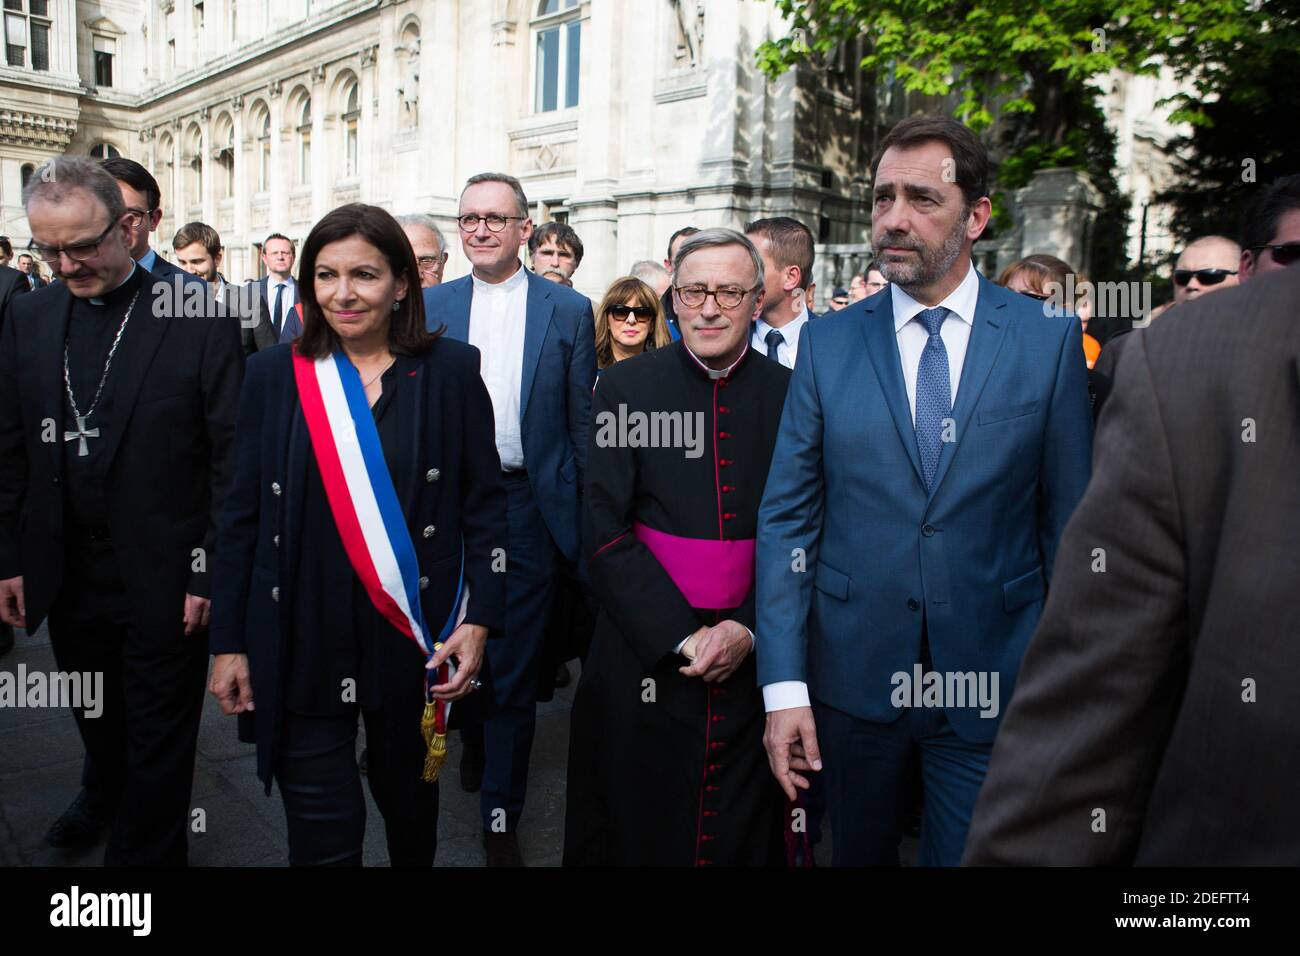 Jean-Marc Chauve, French Interior Minister Christophe Castaner, Paris prefect Didier Lallement, Paris mayor Anne Hidalgo, and other officials walk by Notre Dame cathedral on April 18, 2019 in Paris. France paid a daylong tribute on April 18, 2019 to the Paris firefighters who saved Notre Dame Cathedral from collapse, while construction workers rushed to secure an area above one of the church's famed rose-shaped windows and other vulnerable sections of the fire-damaged landmark. Photo by Raphael Lafargue/ABACAPRESS.COM Stock Photo